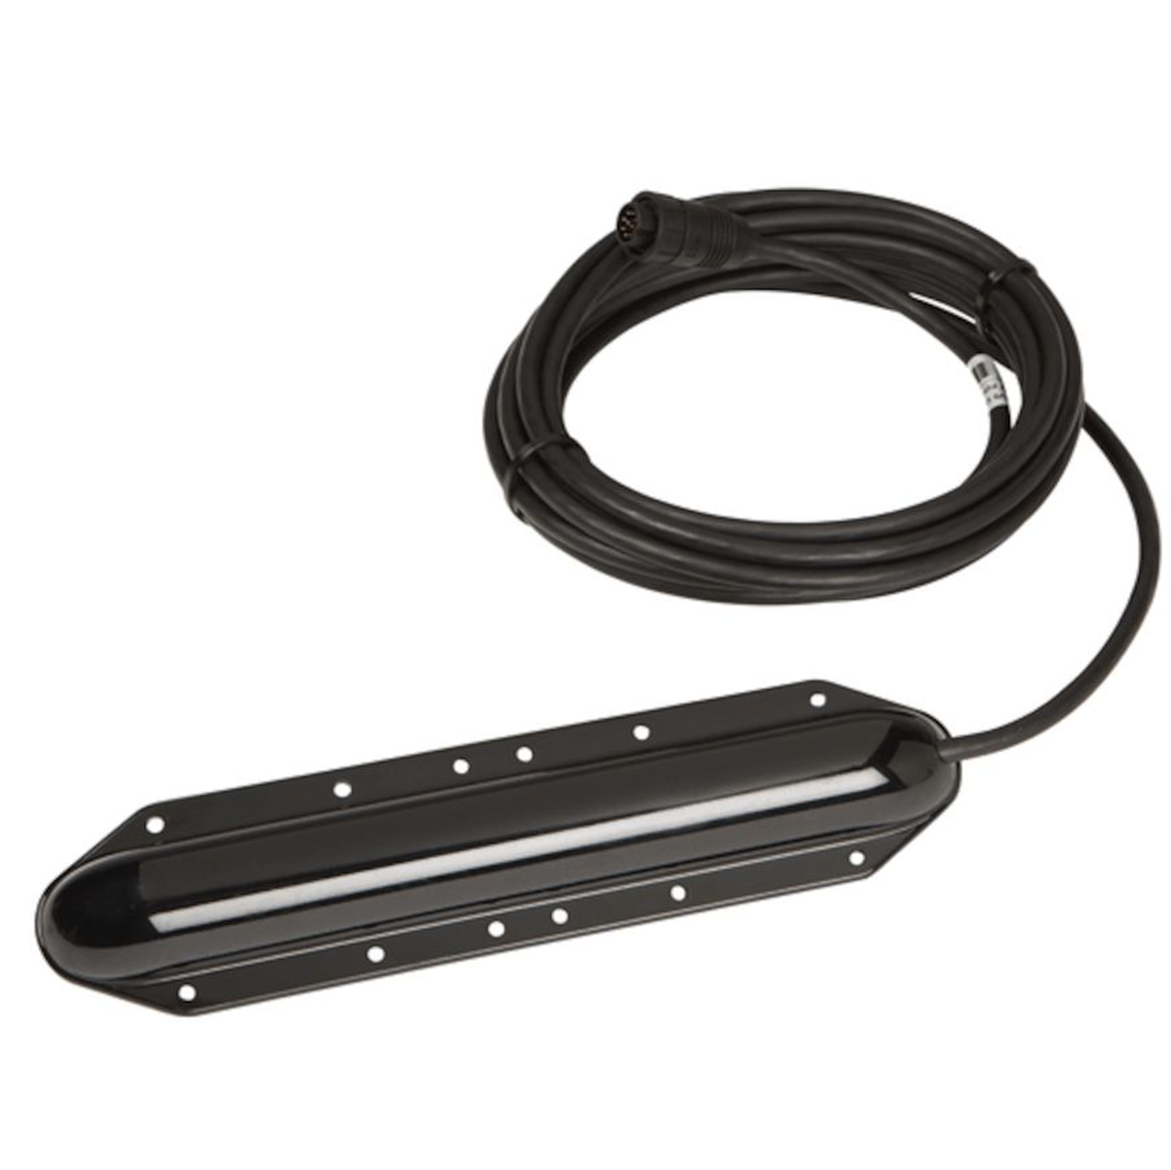 Lowrance StructureScan HD Skimmer Transducer